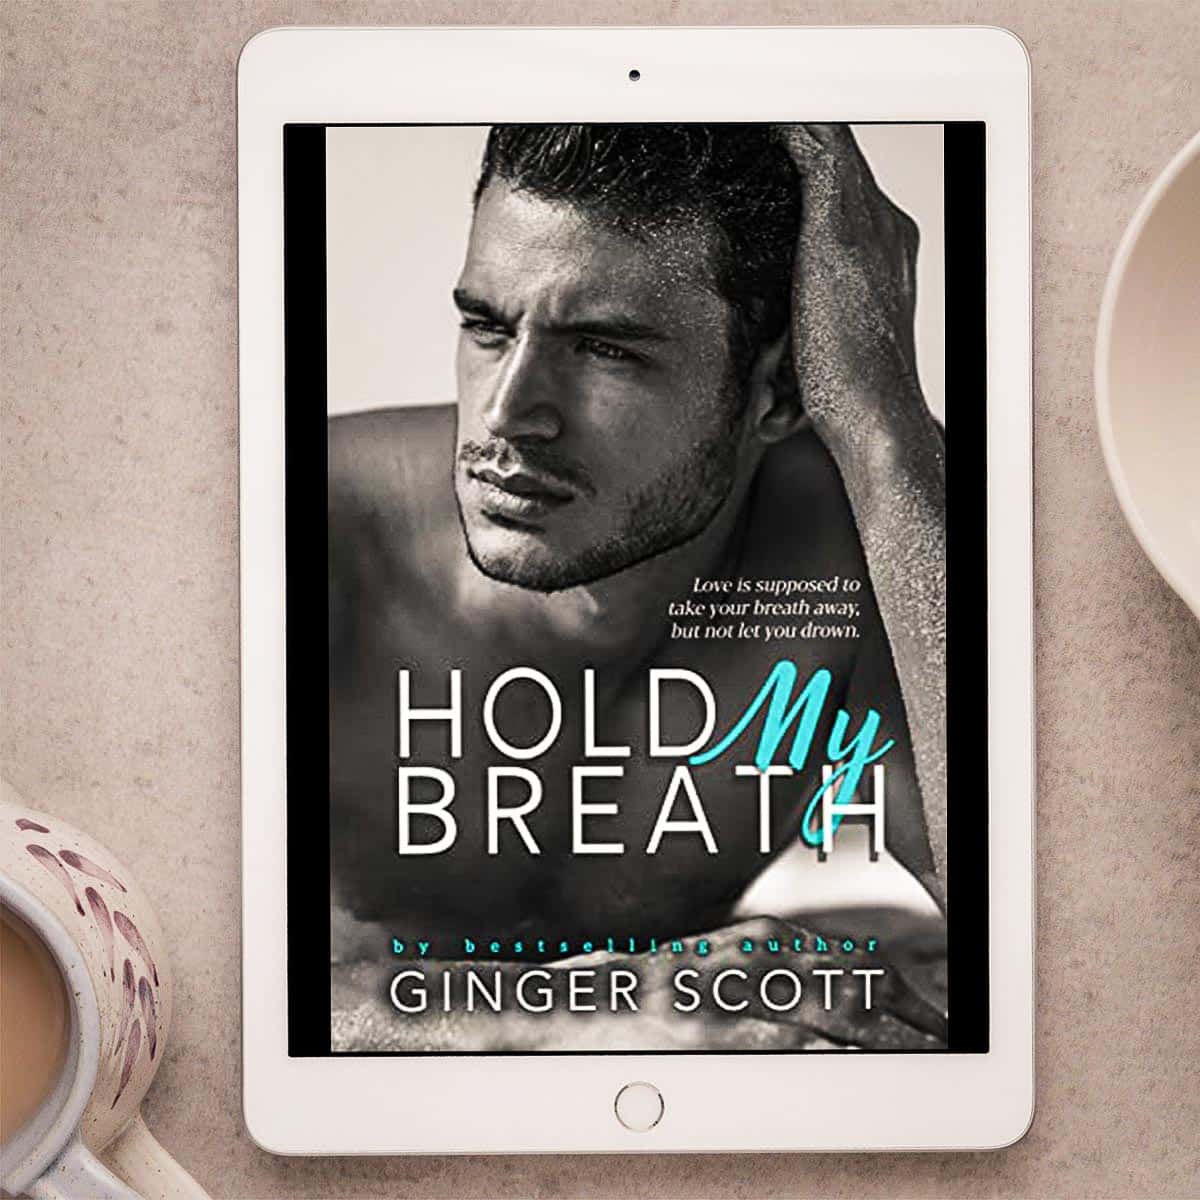 Hold My Breath by Ginger Scott is a new adult sports romance with a story of survival, of reframing your history, and ultimately, of love conquering all.